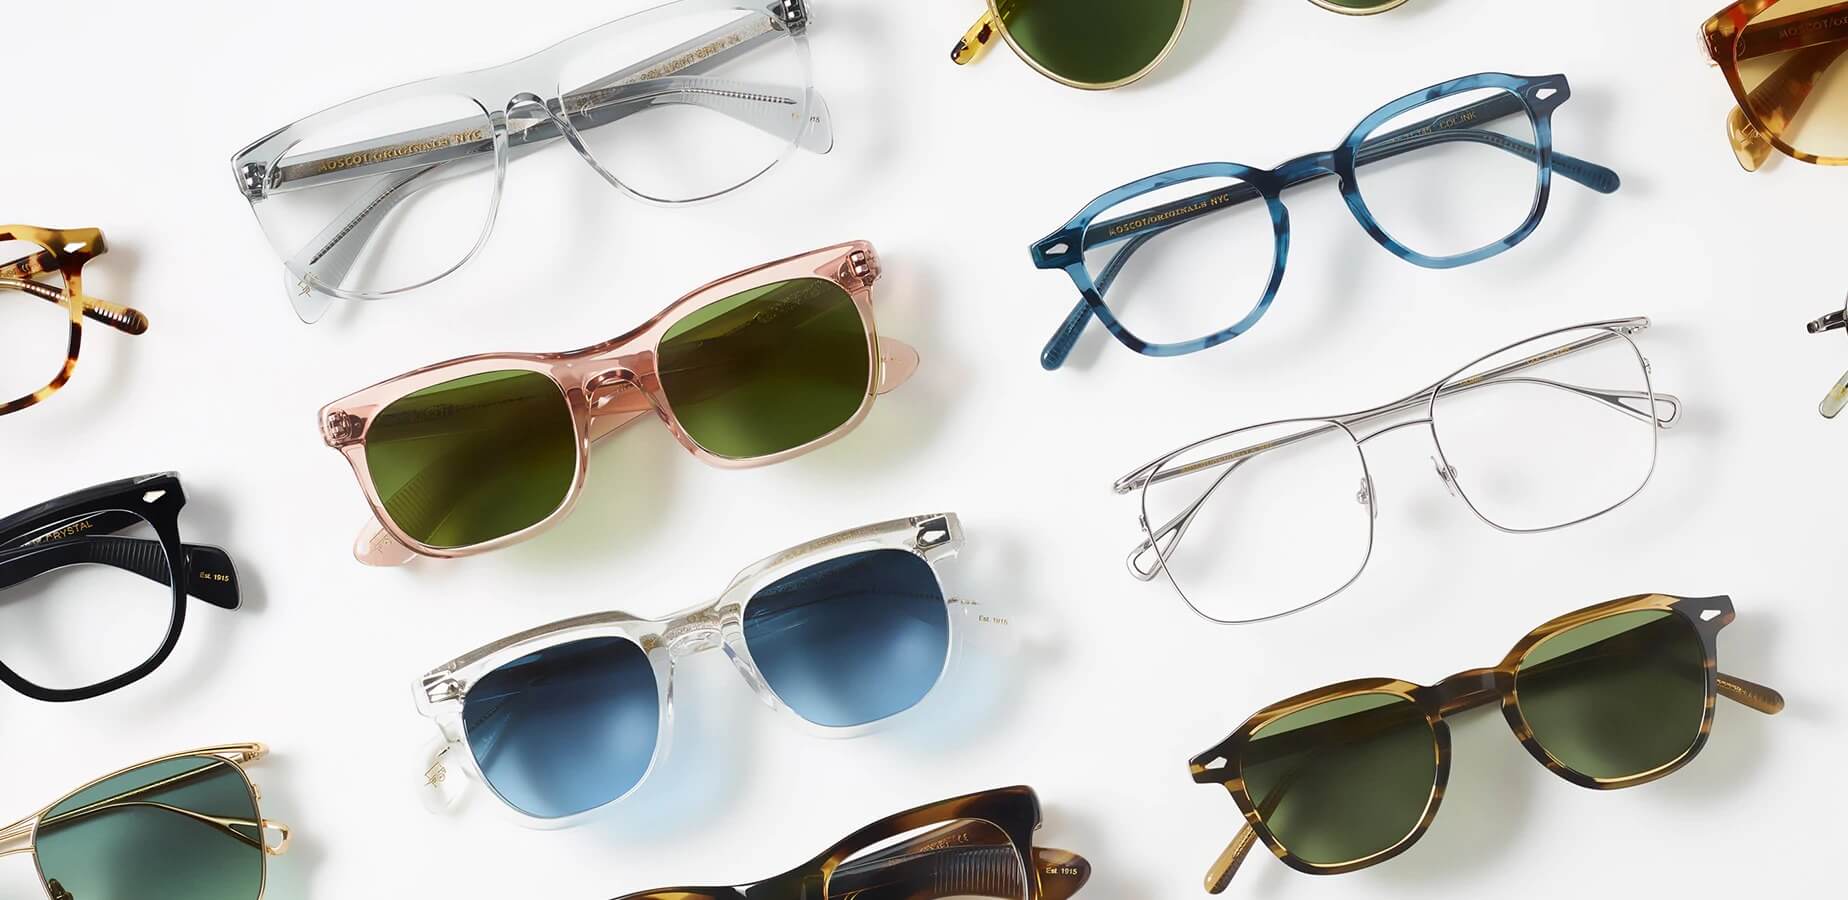 The new Spring 2021 Collection and shares the family-passed story behind each heritage-inspired frame.